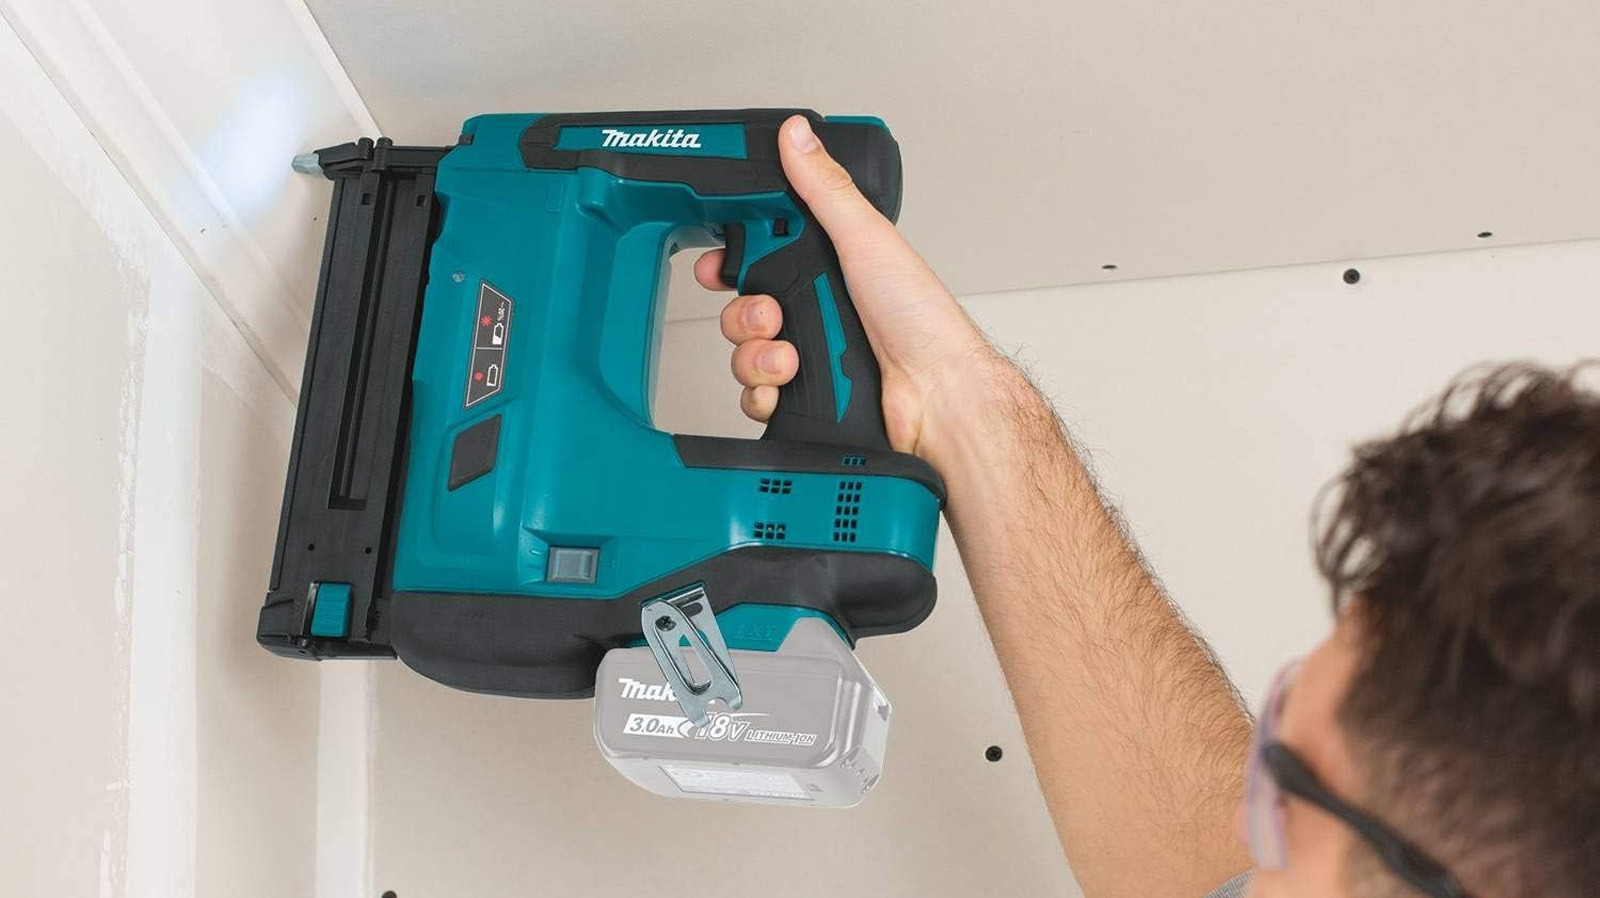 5 Of The Most Popular Makita Power Tools For DIY Jobs